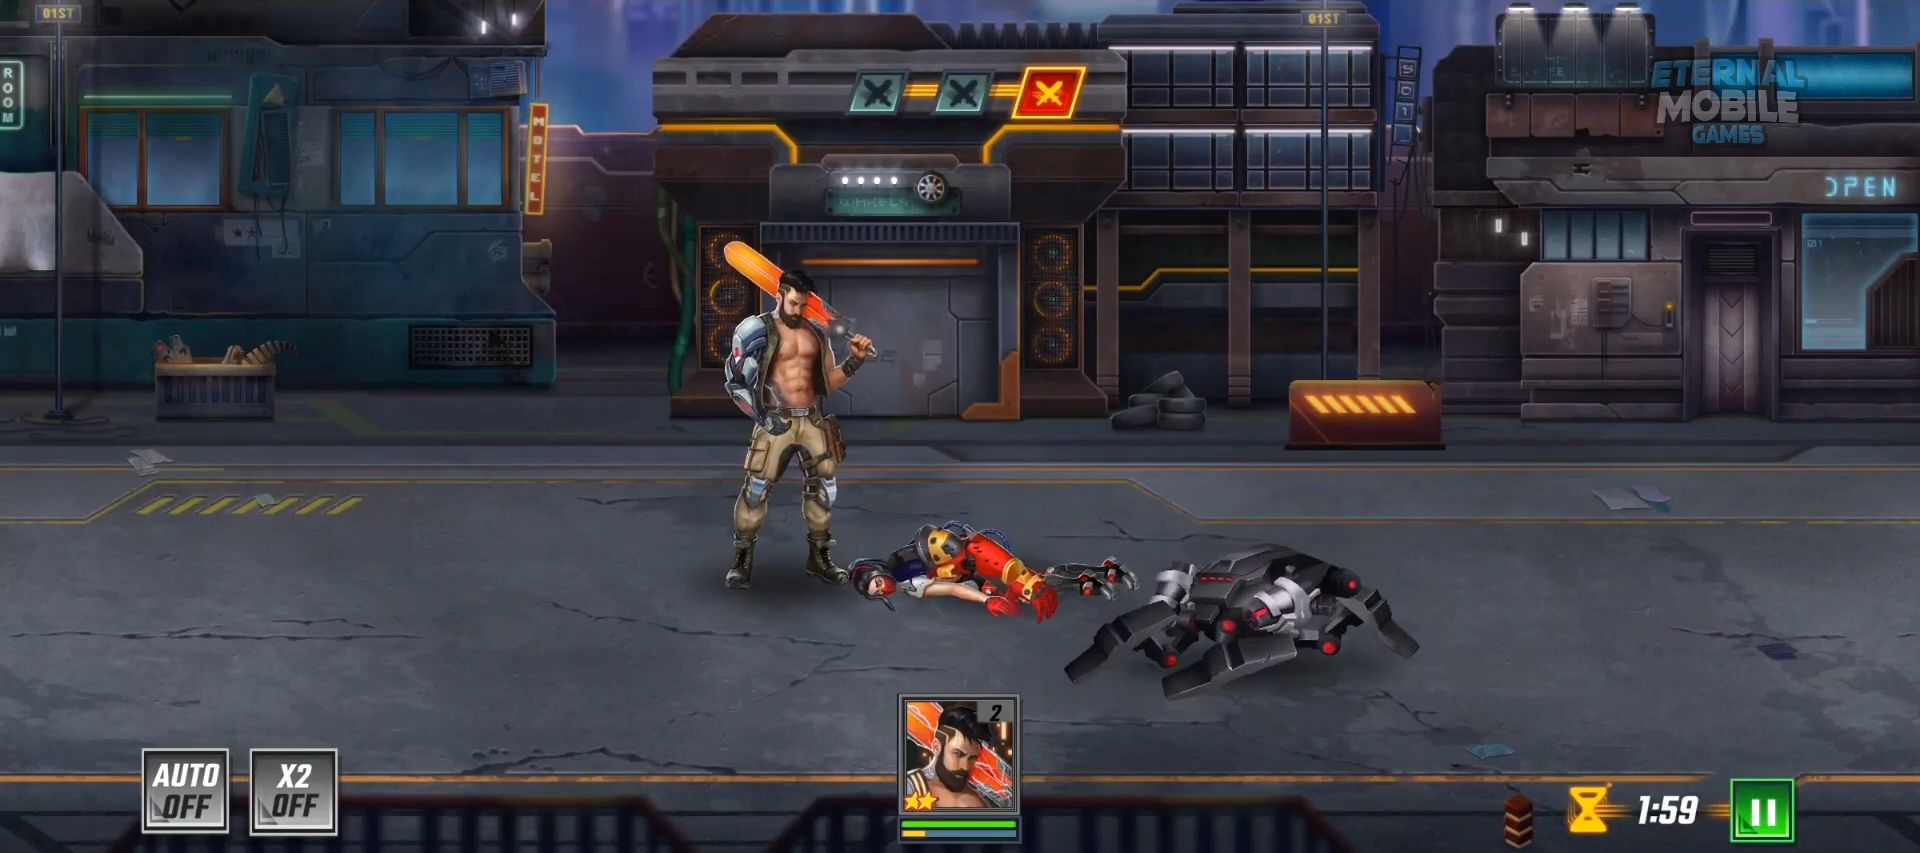 Scarica Squad of Heroes: RPG battle gratis per Android.